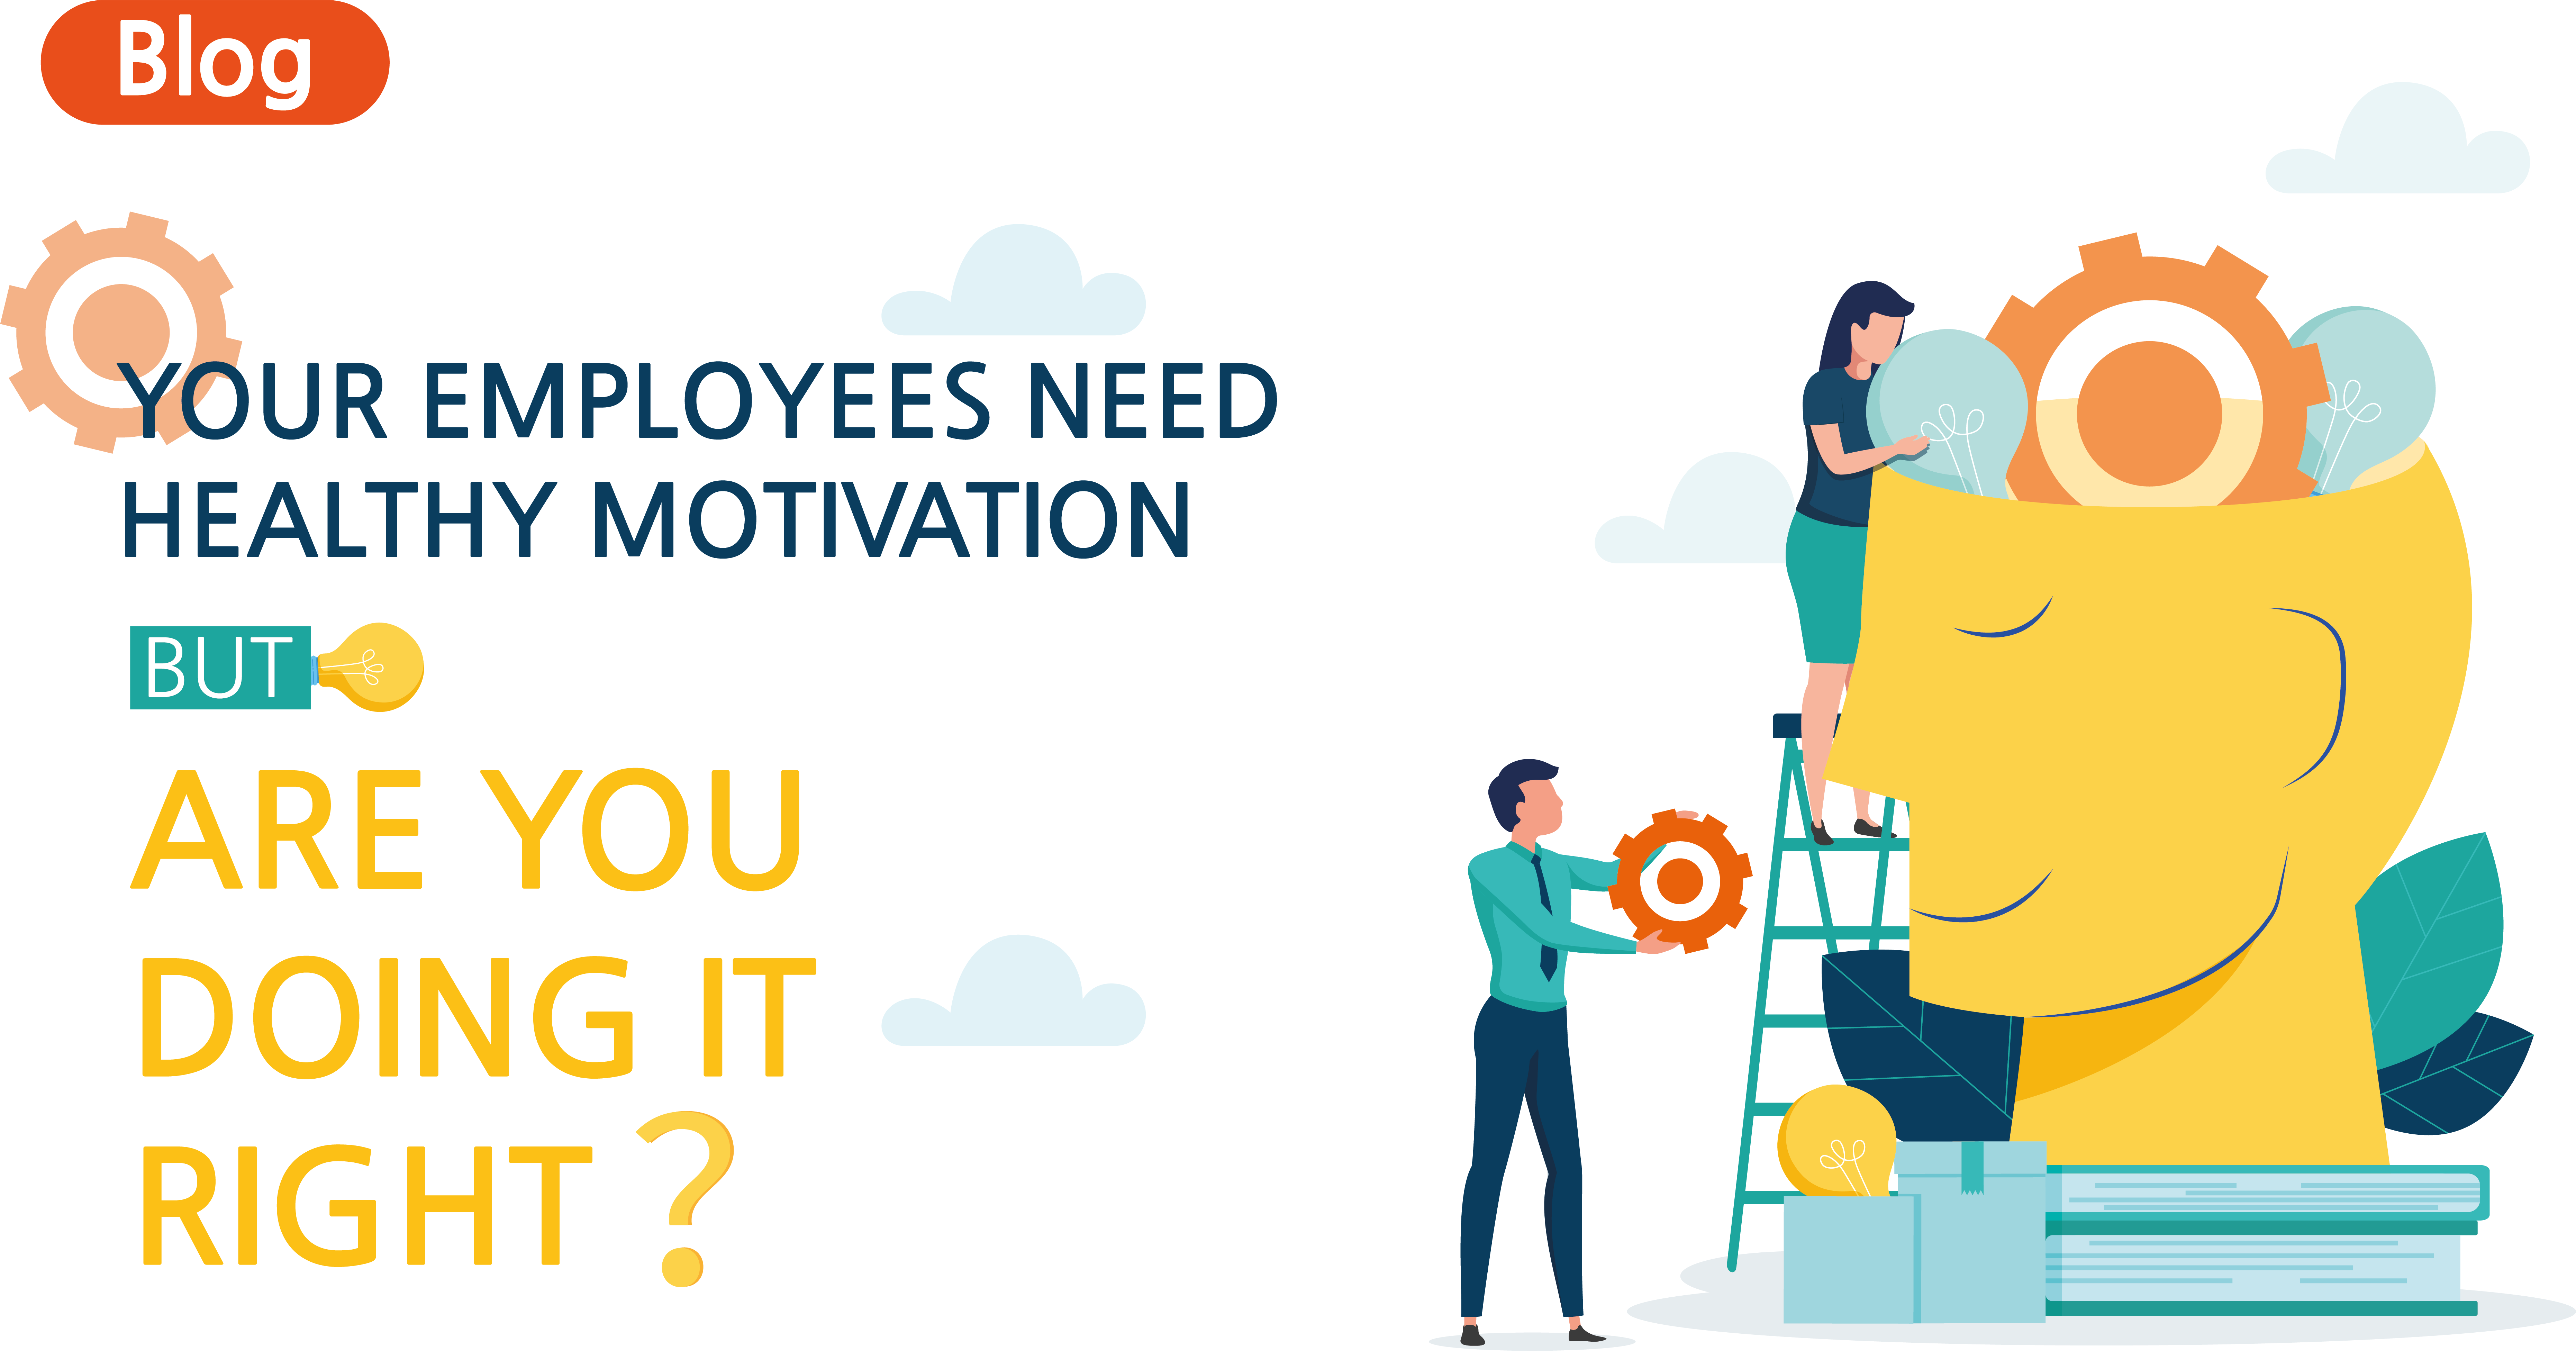 Your Employees Need Healthy Motivation, And Are You Doing It Right?